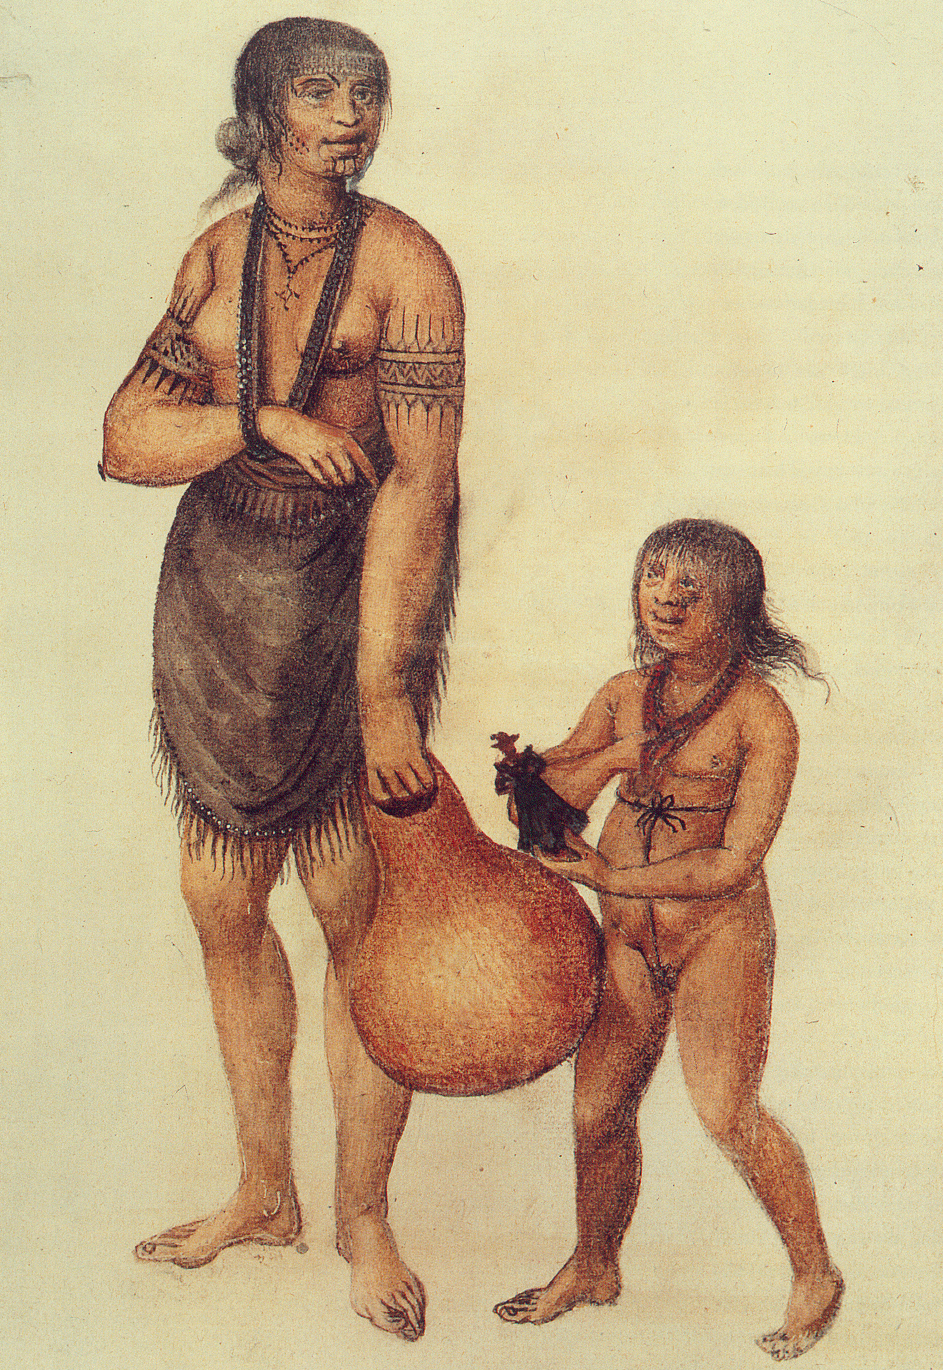 What are some traits of the Yuma Indian culture?